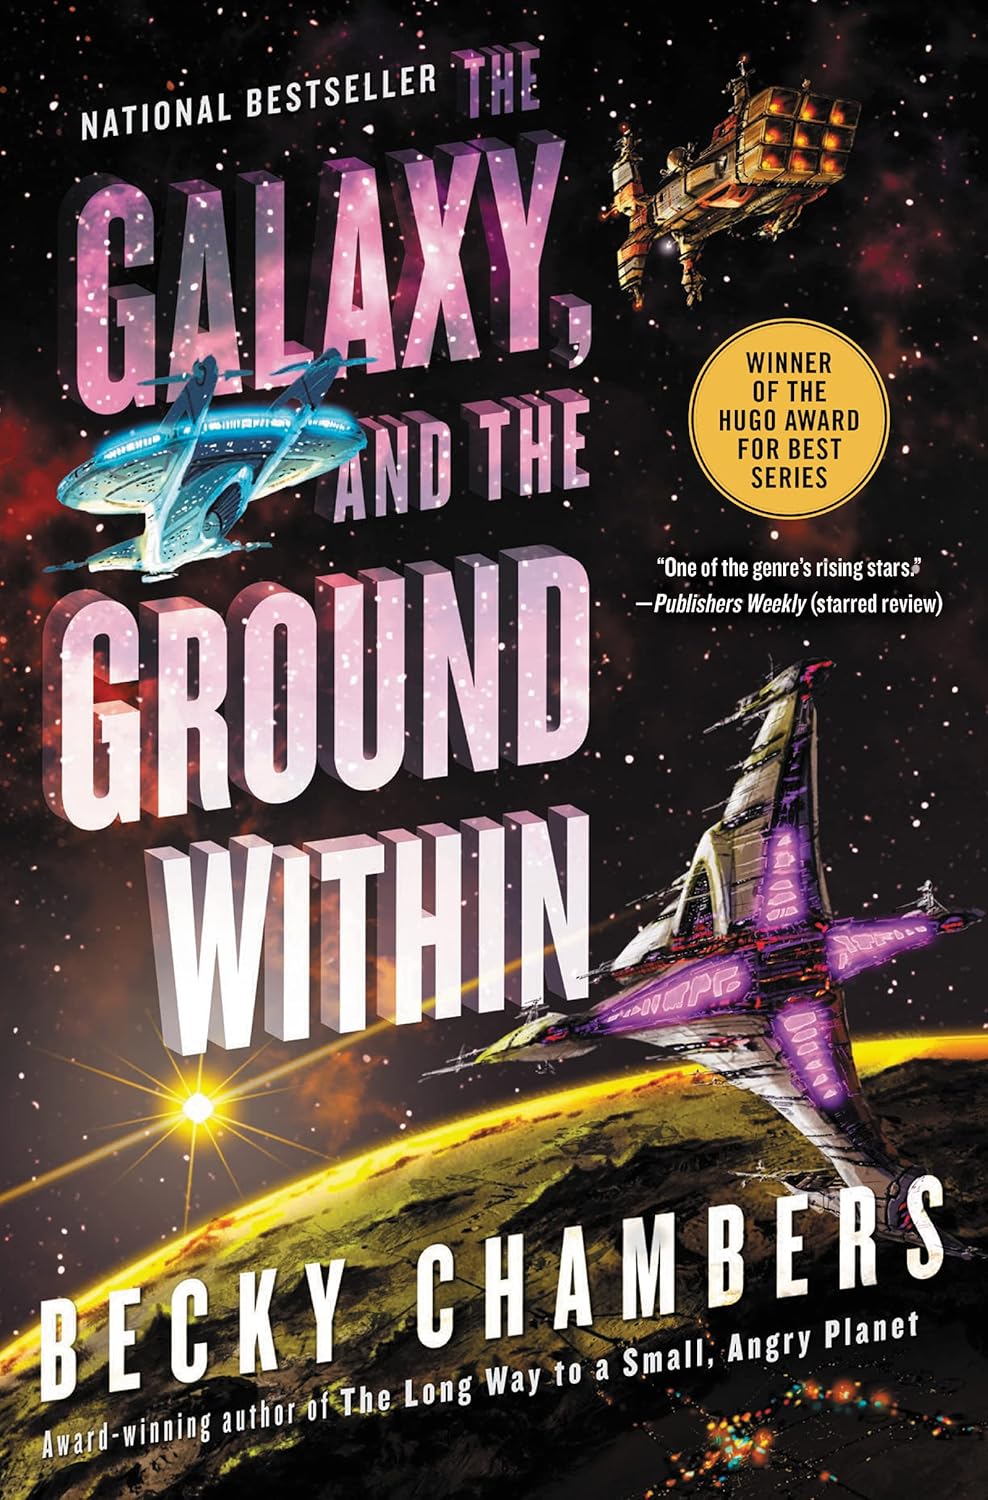 Becky Chambers: The Galaxy, and the Ground Within (AudiobookFormat, 2021, HarperCollins B and Blackstone Publishing)